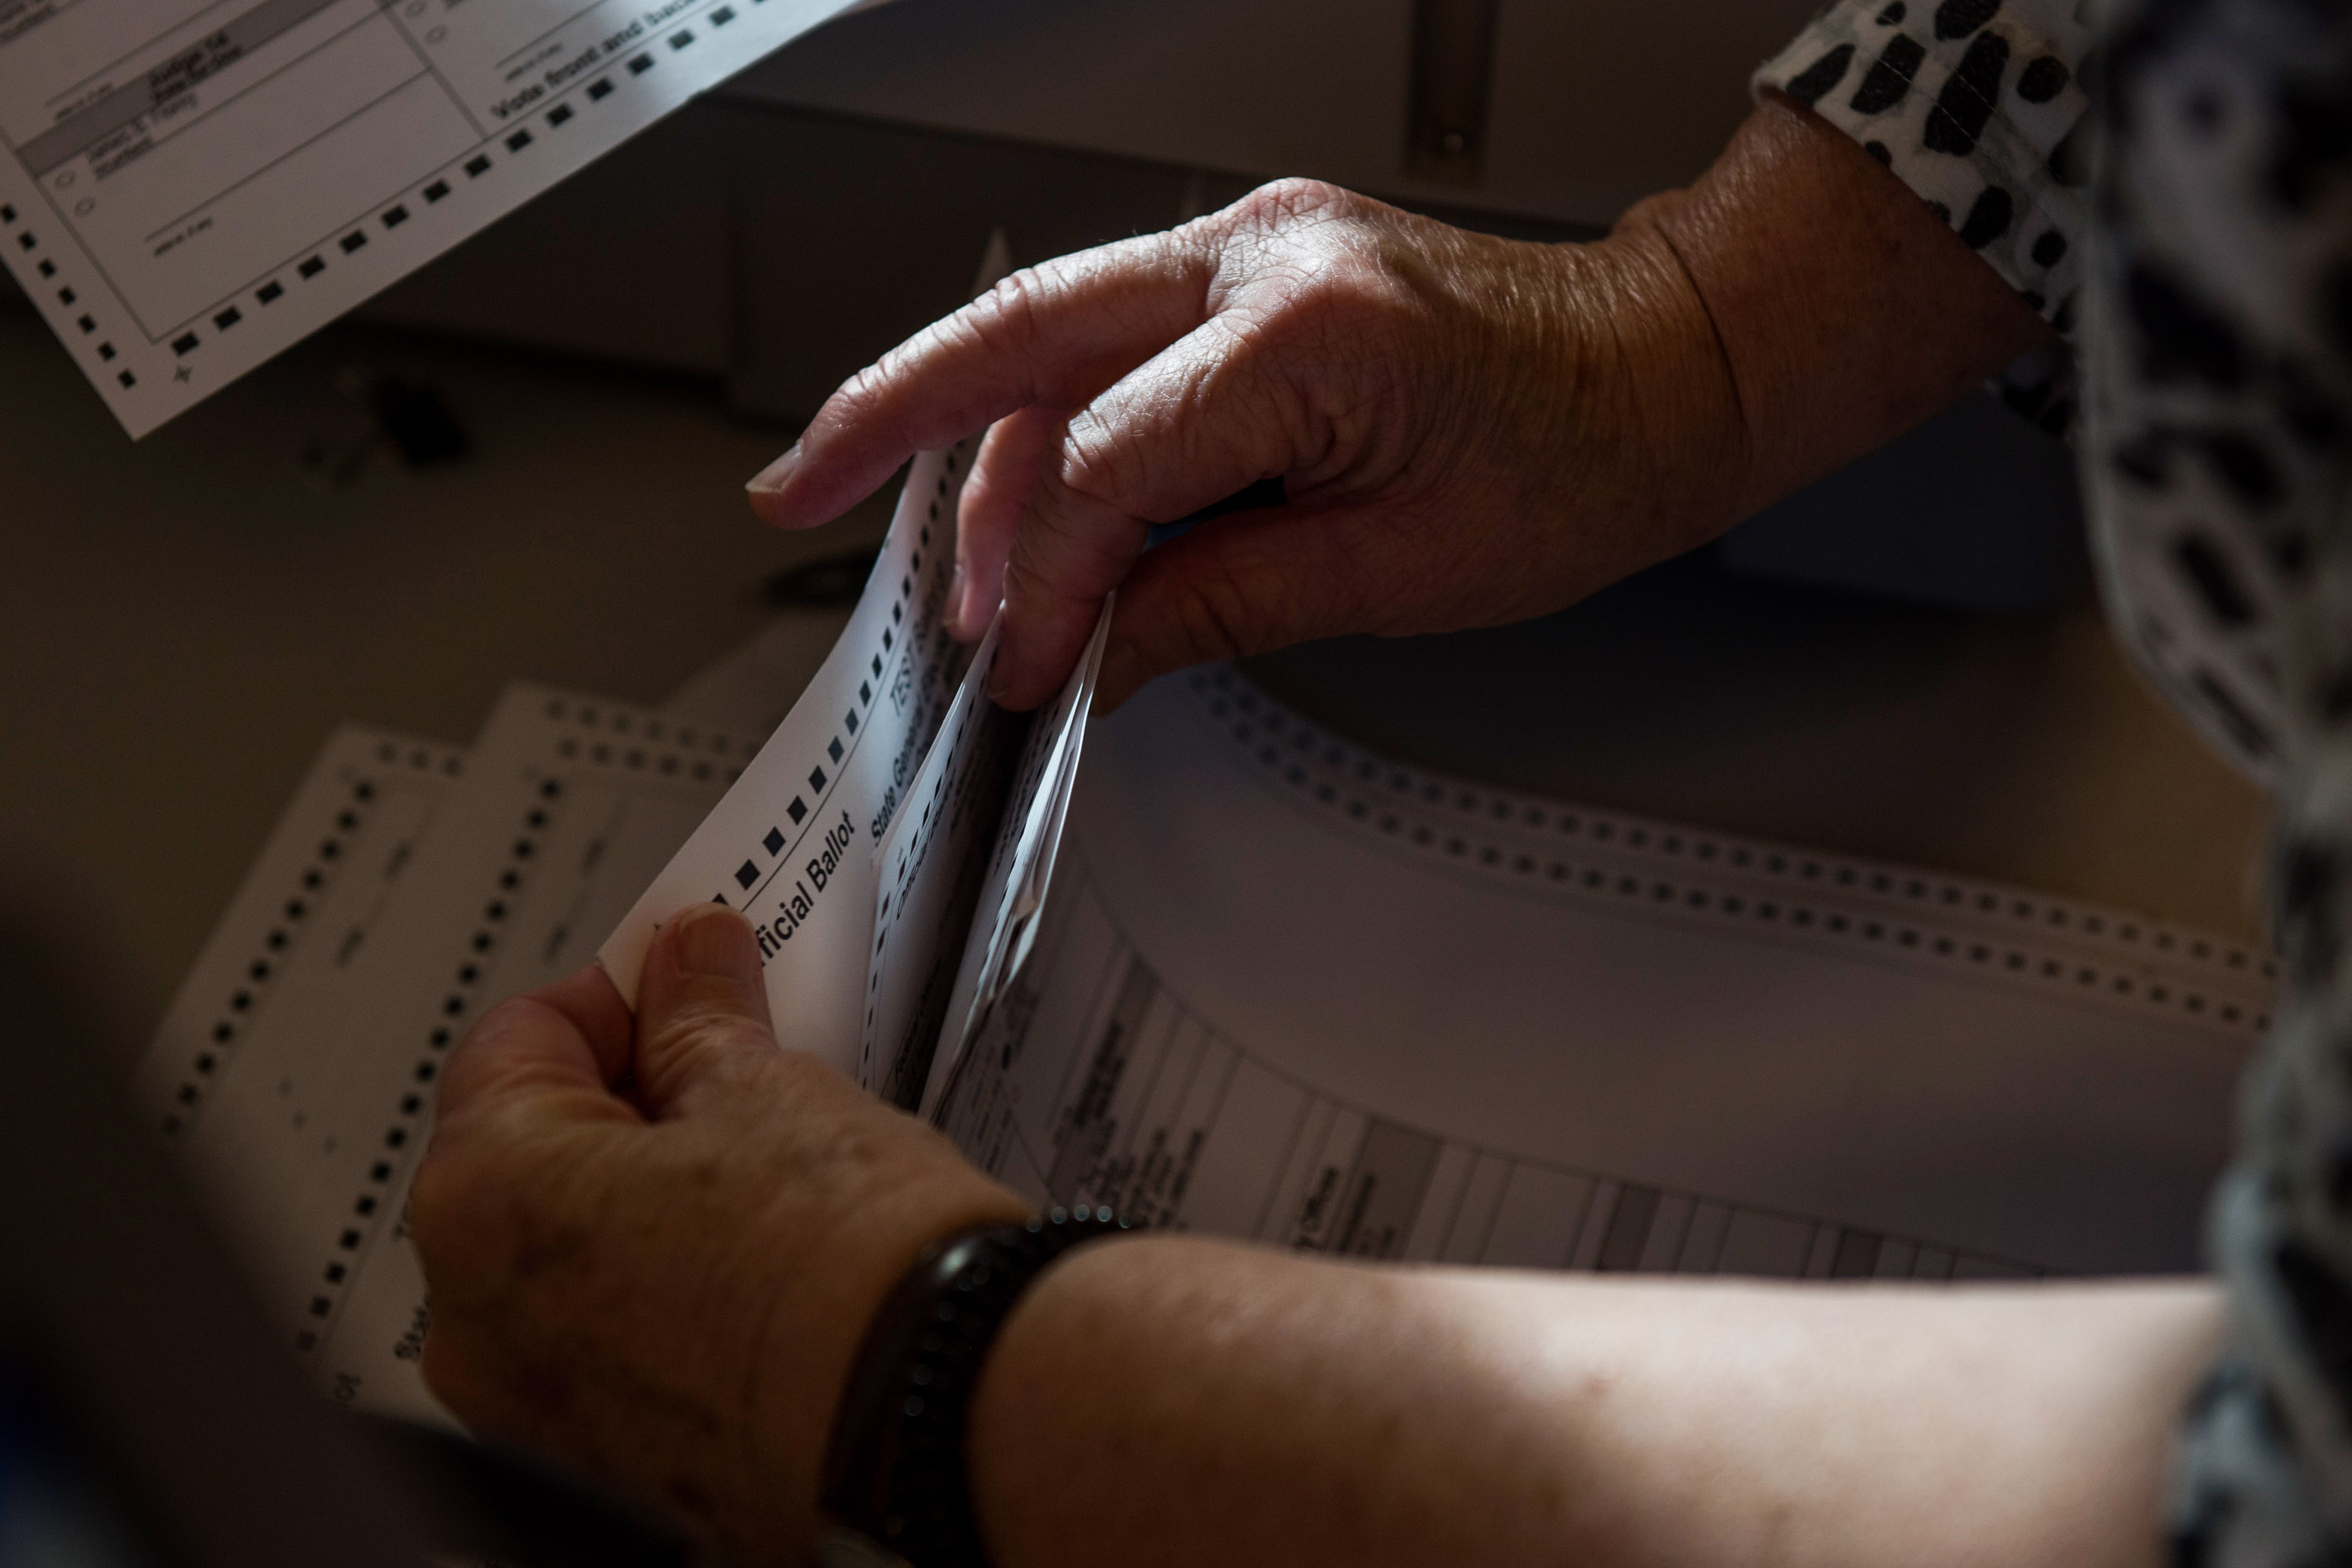 Hands of an election official conducting a count of paper test ballots.